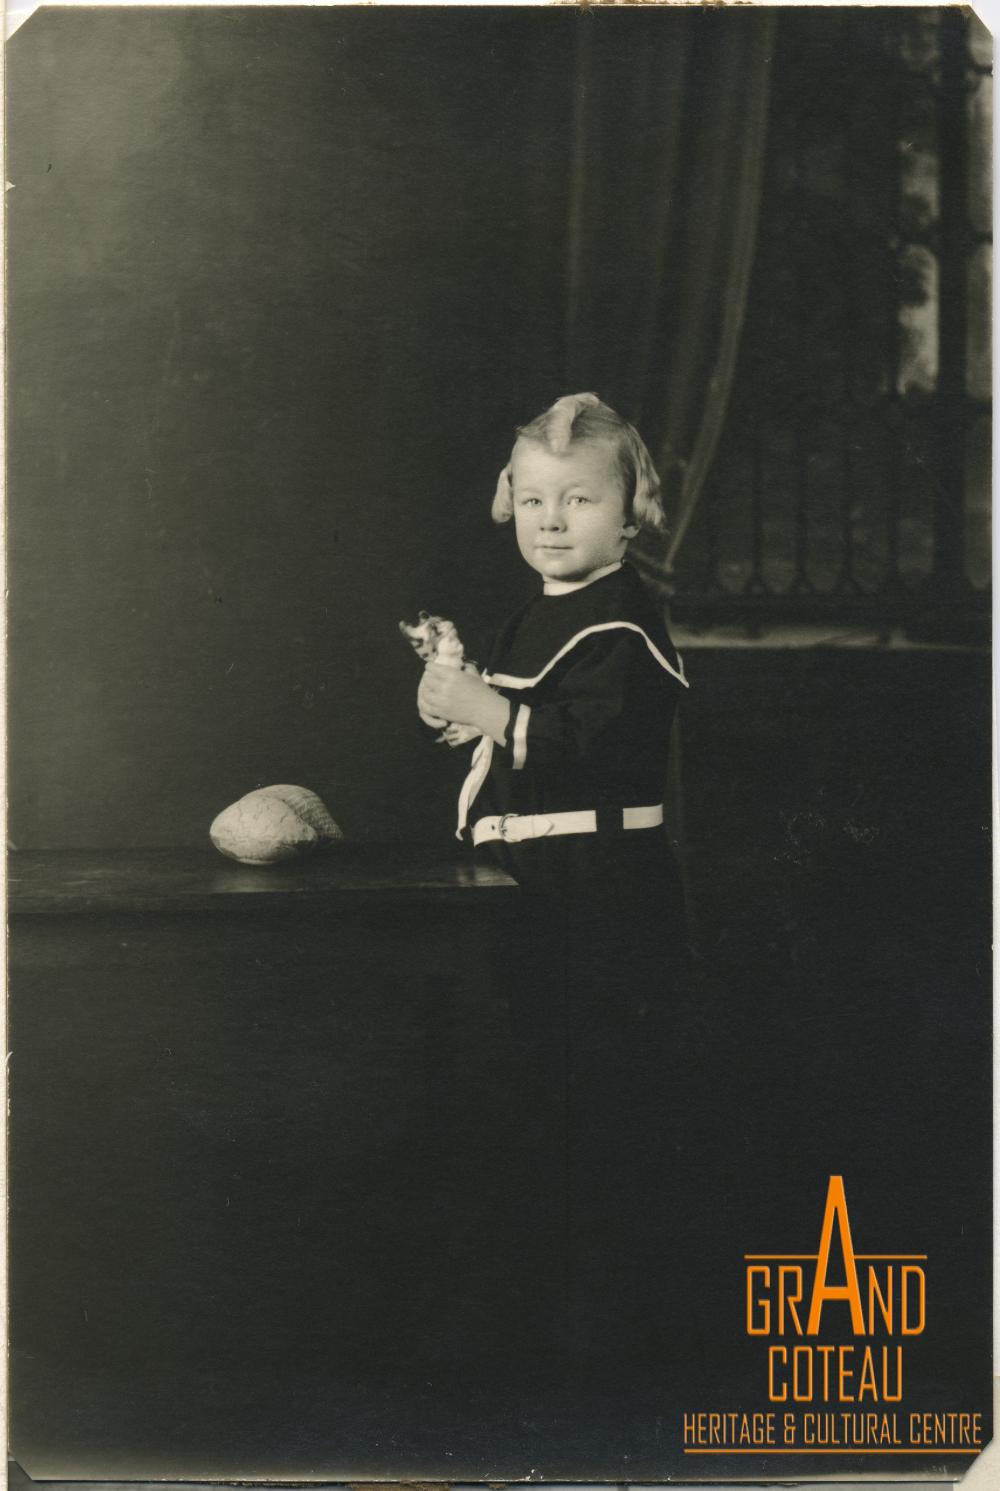 Photograph, Leonard 'Hymie' Hanft as a child, approximately 4 years old